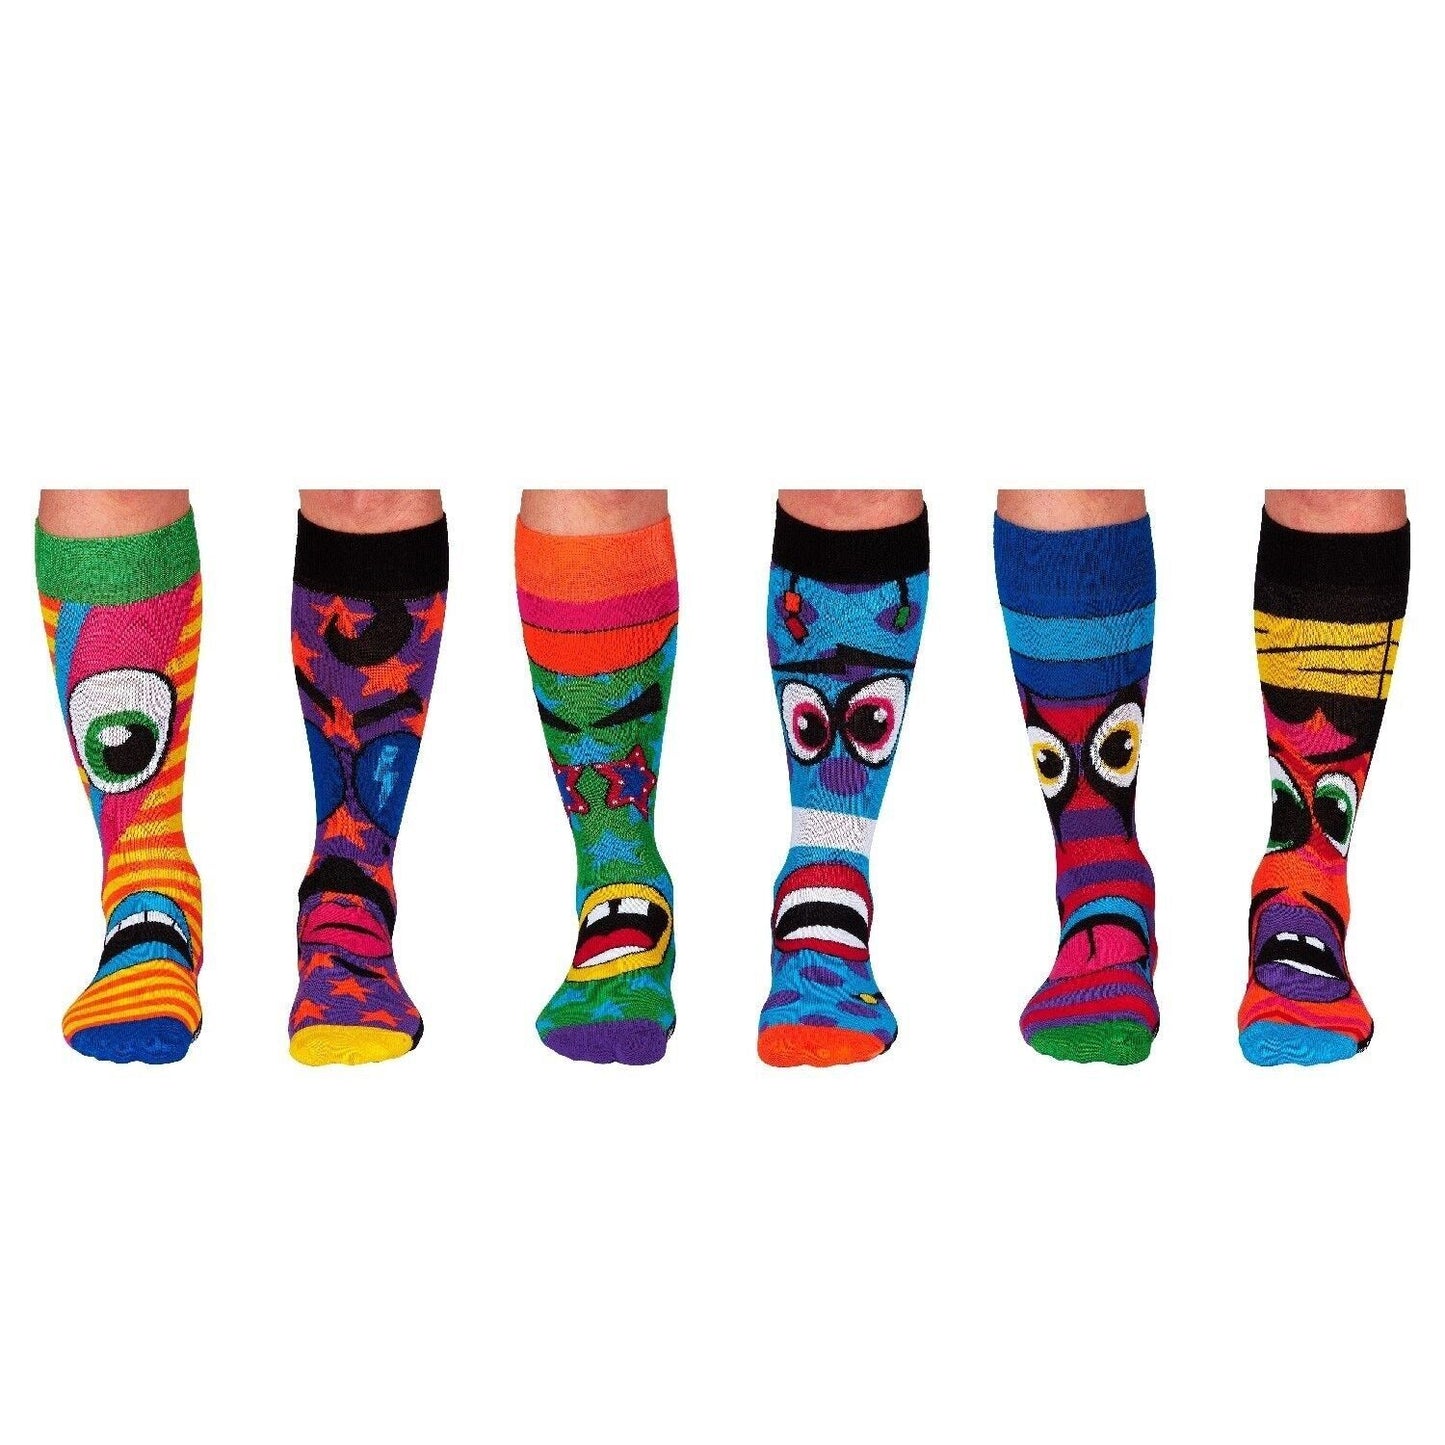 United Oddsocks Funk Heads, 6 chaussettes fantaisie Funkin United Oddsocks